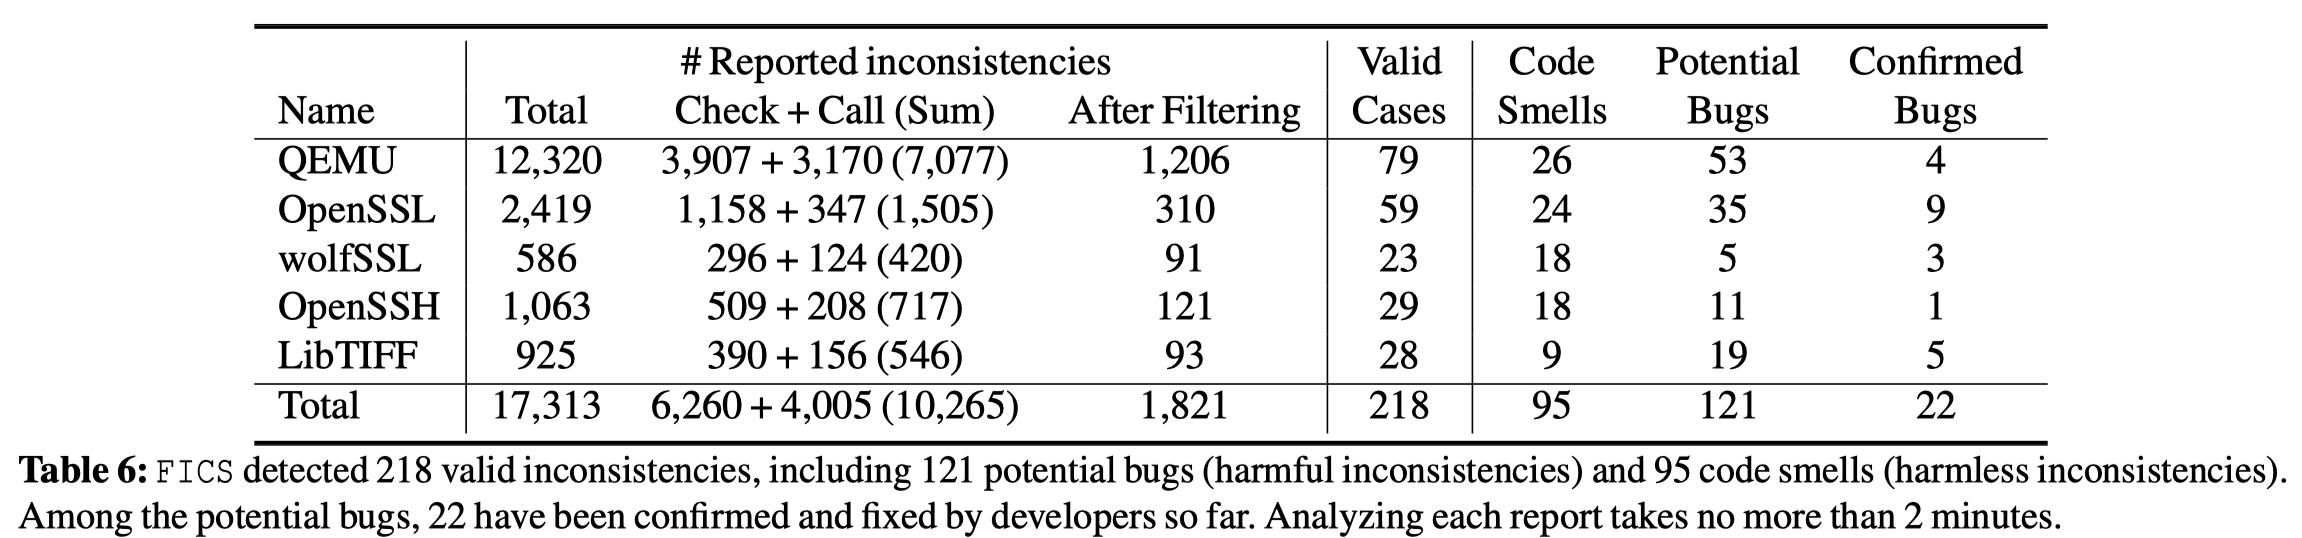 2021-01-07-Finding%20Bugs%20Using%20Your%20Own%20Code%20Detect%20dac748c567ed4d509cf1e69500225bd1/Untitled%2010.png